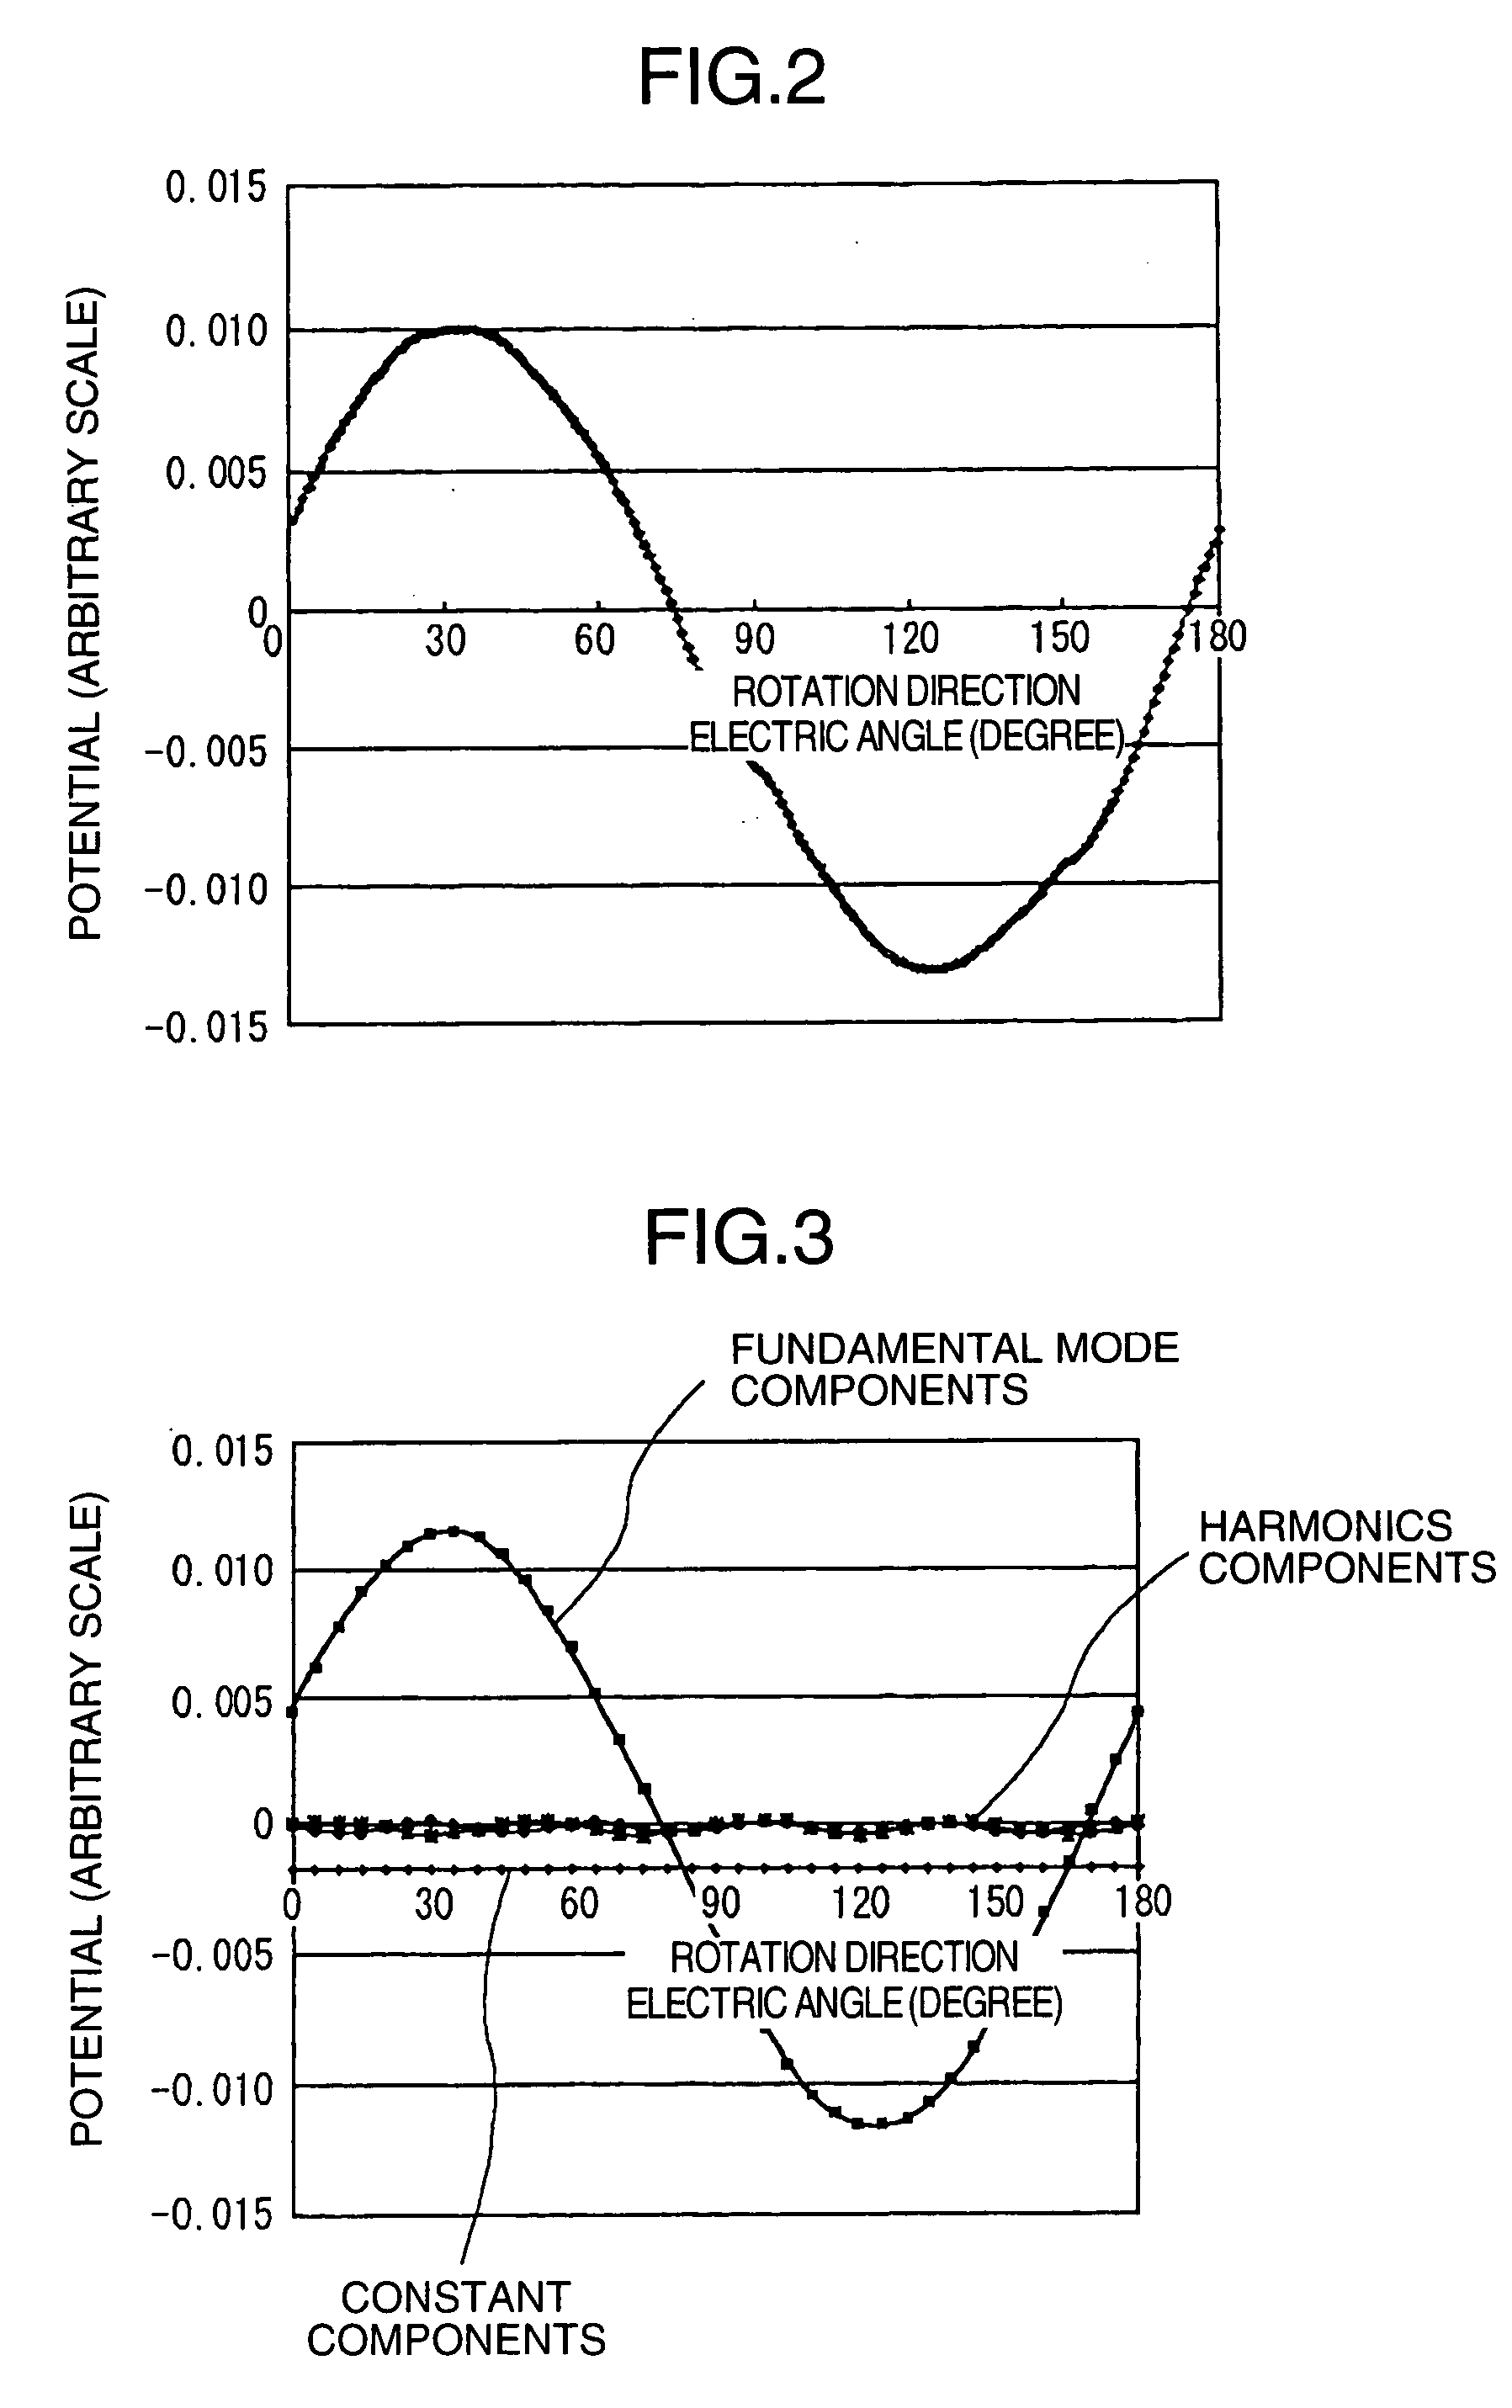 Magnetic field analysis method and programs for rotating machines